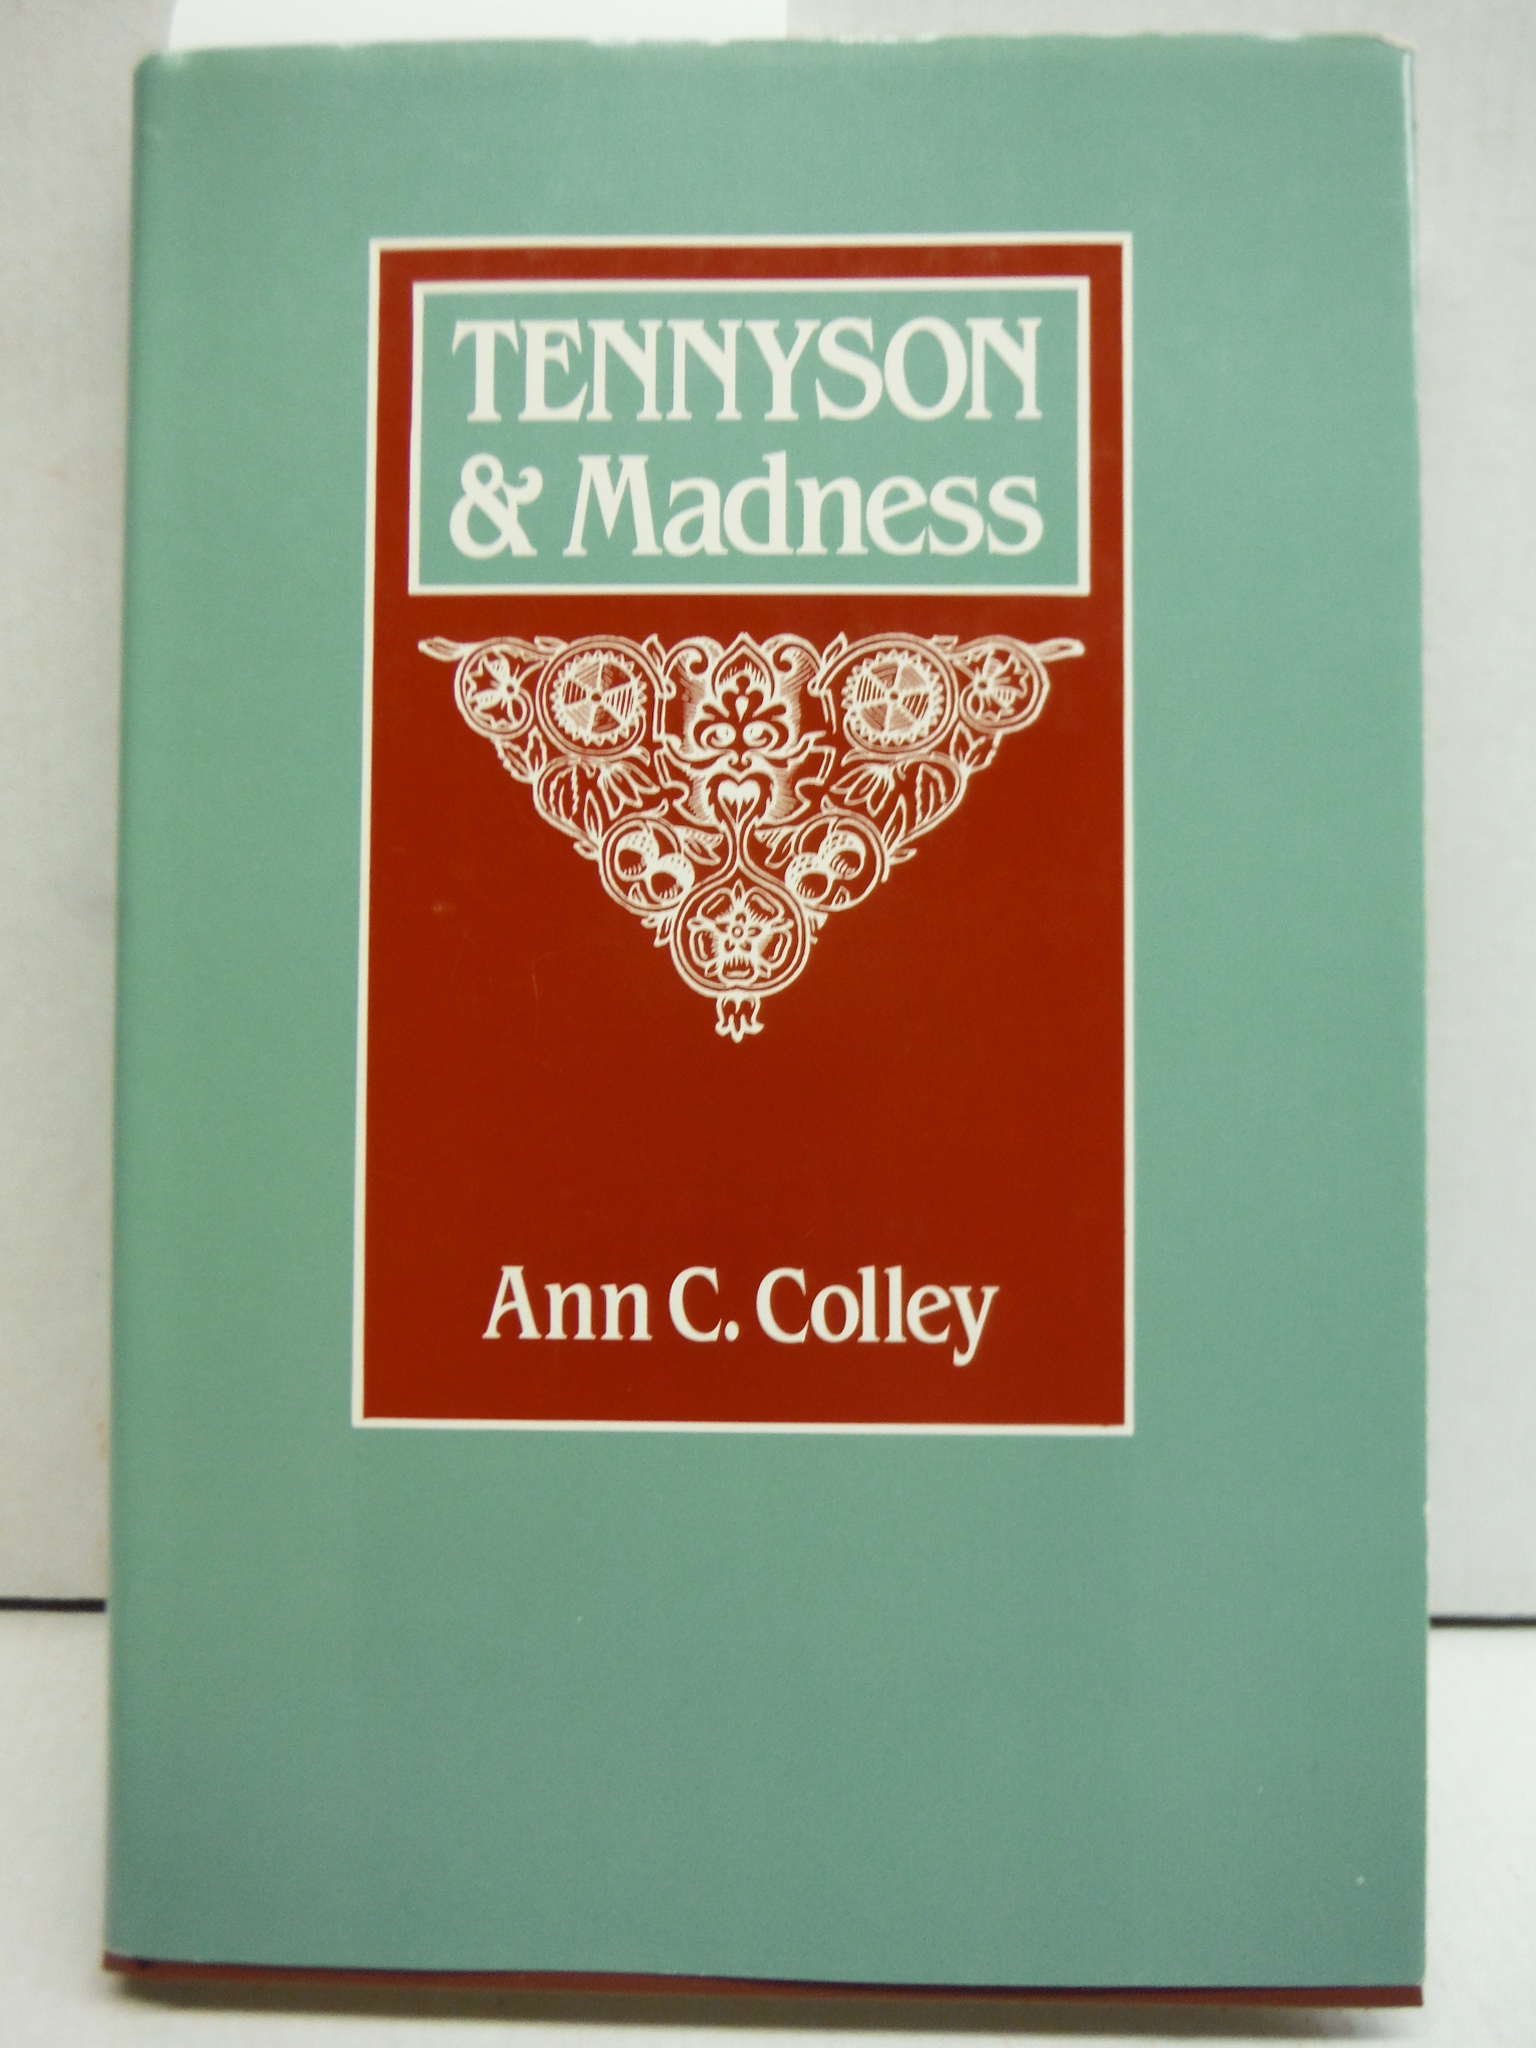 Tennyson and Madness